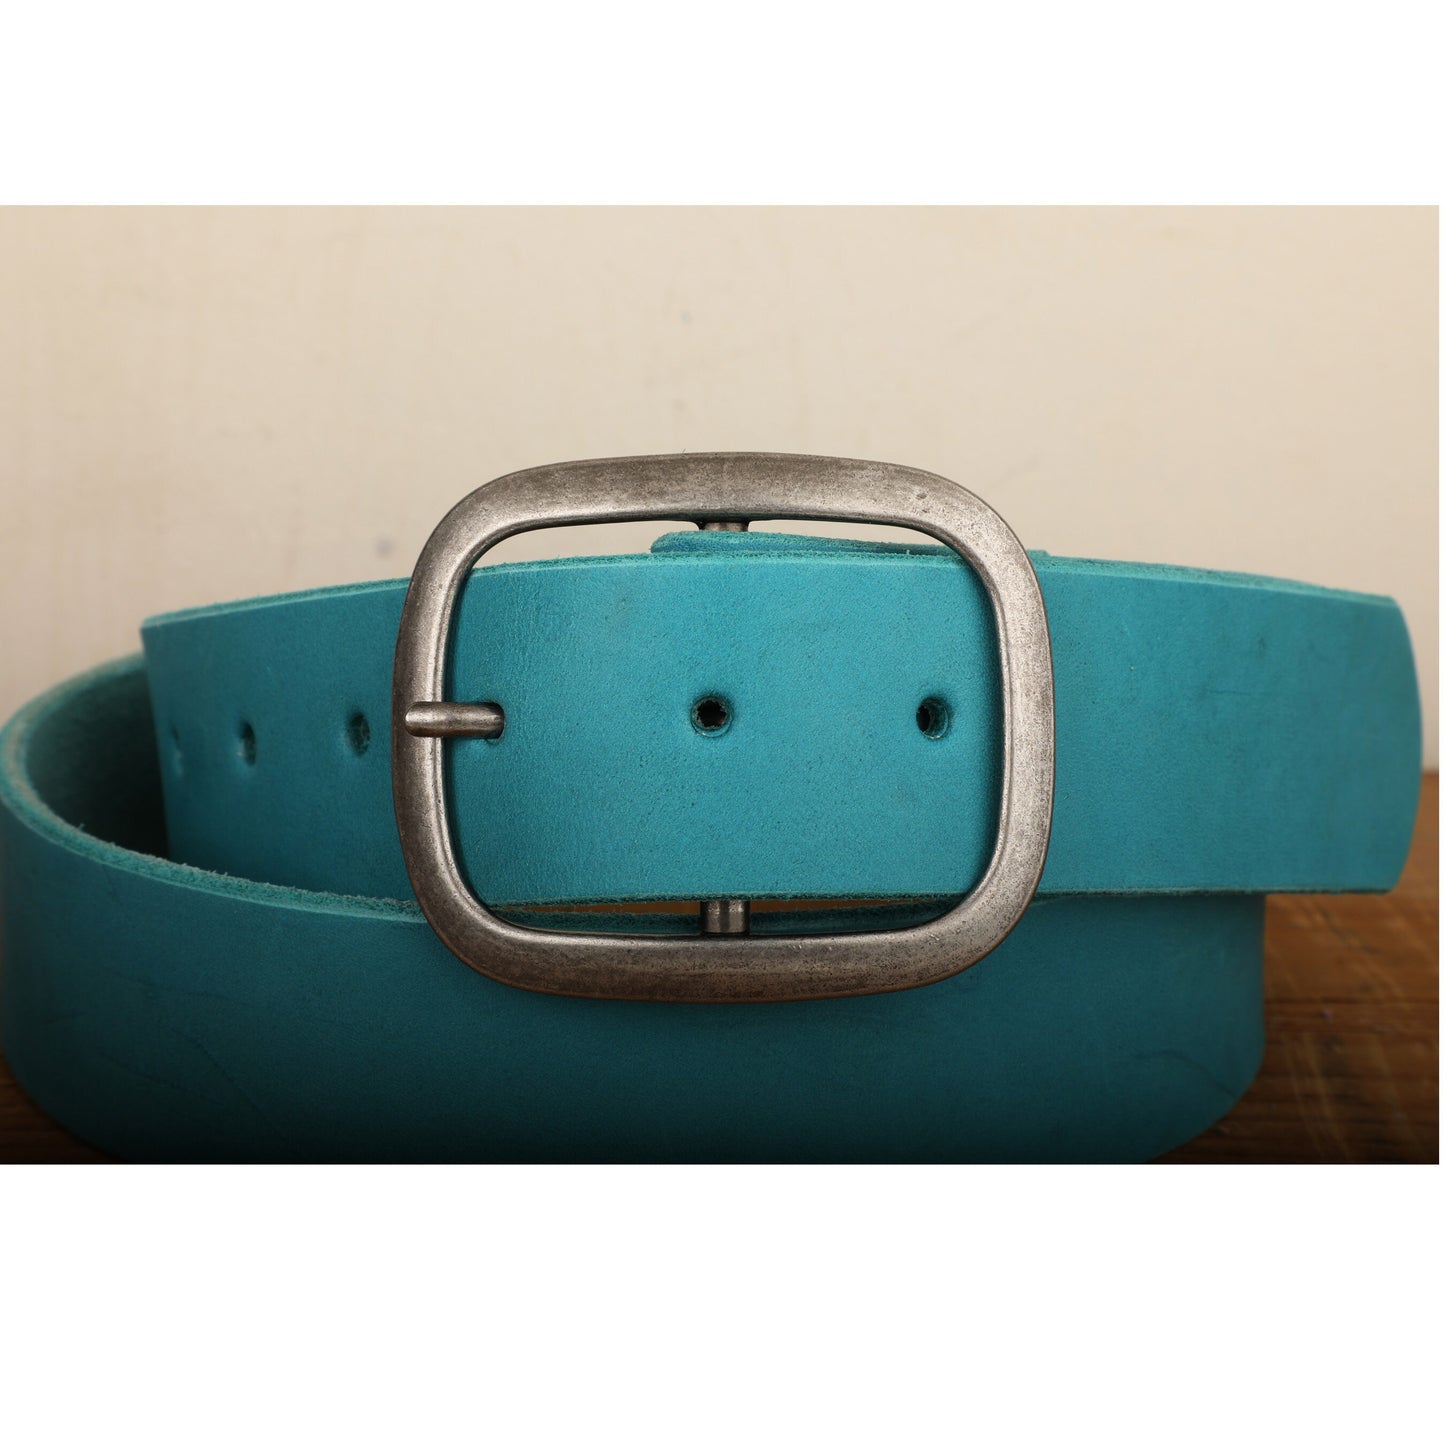 Turquoise Leather Belt Snap Closure - Handmade in USA - Unisex Wide Antique Silver Tone Nickel Buckle